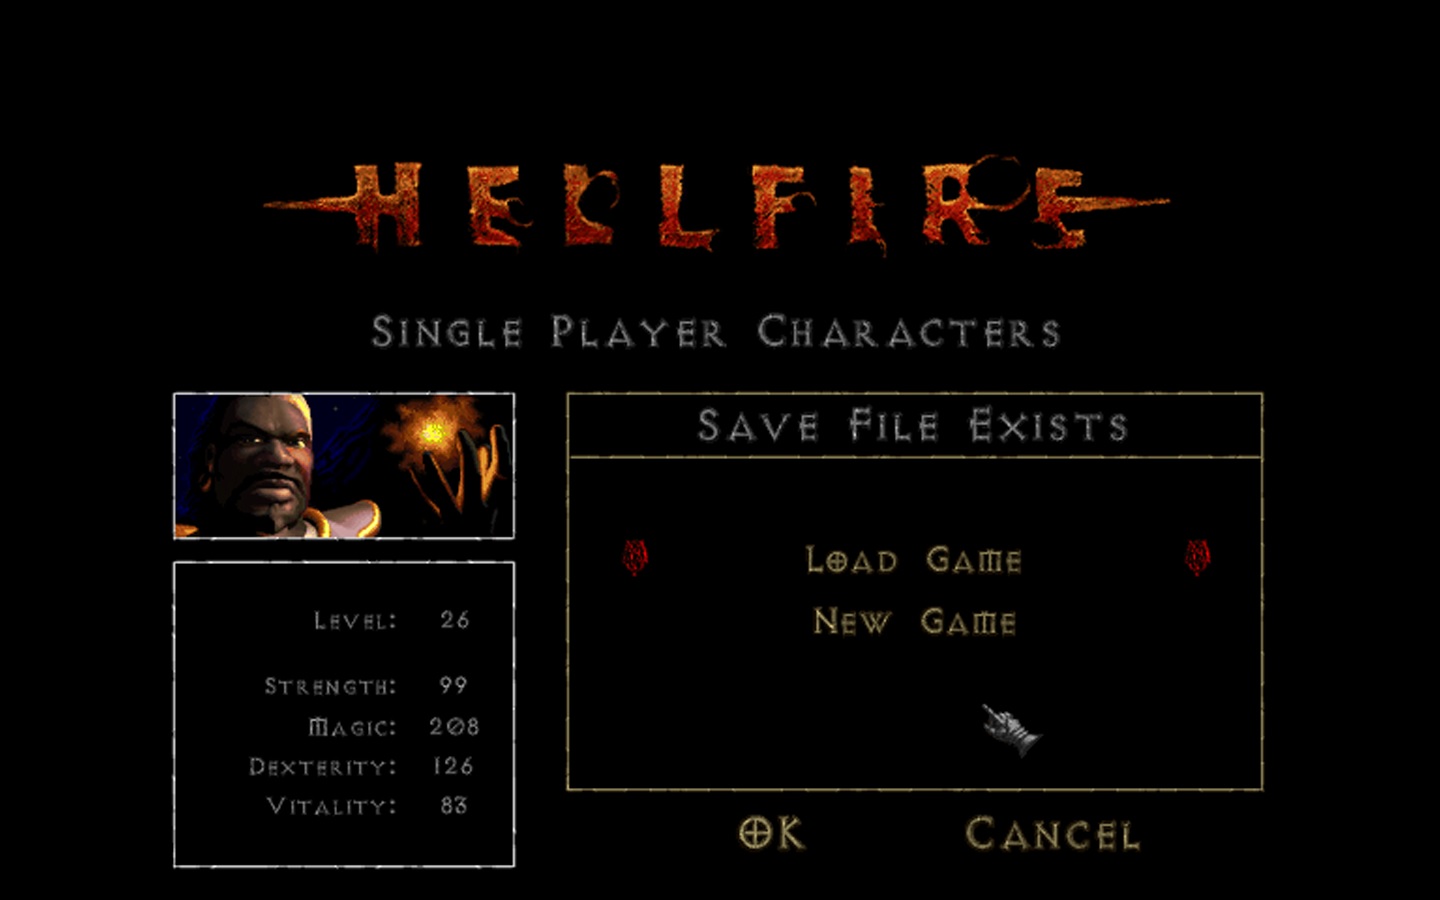 Diablo: Hellfire - SaveGame (Game completed 100%, before the final boss)